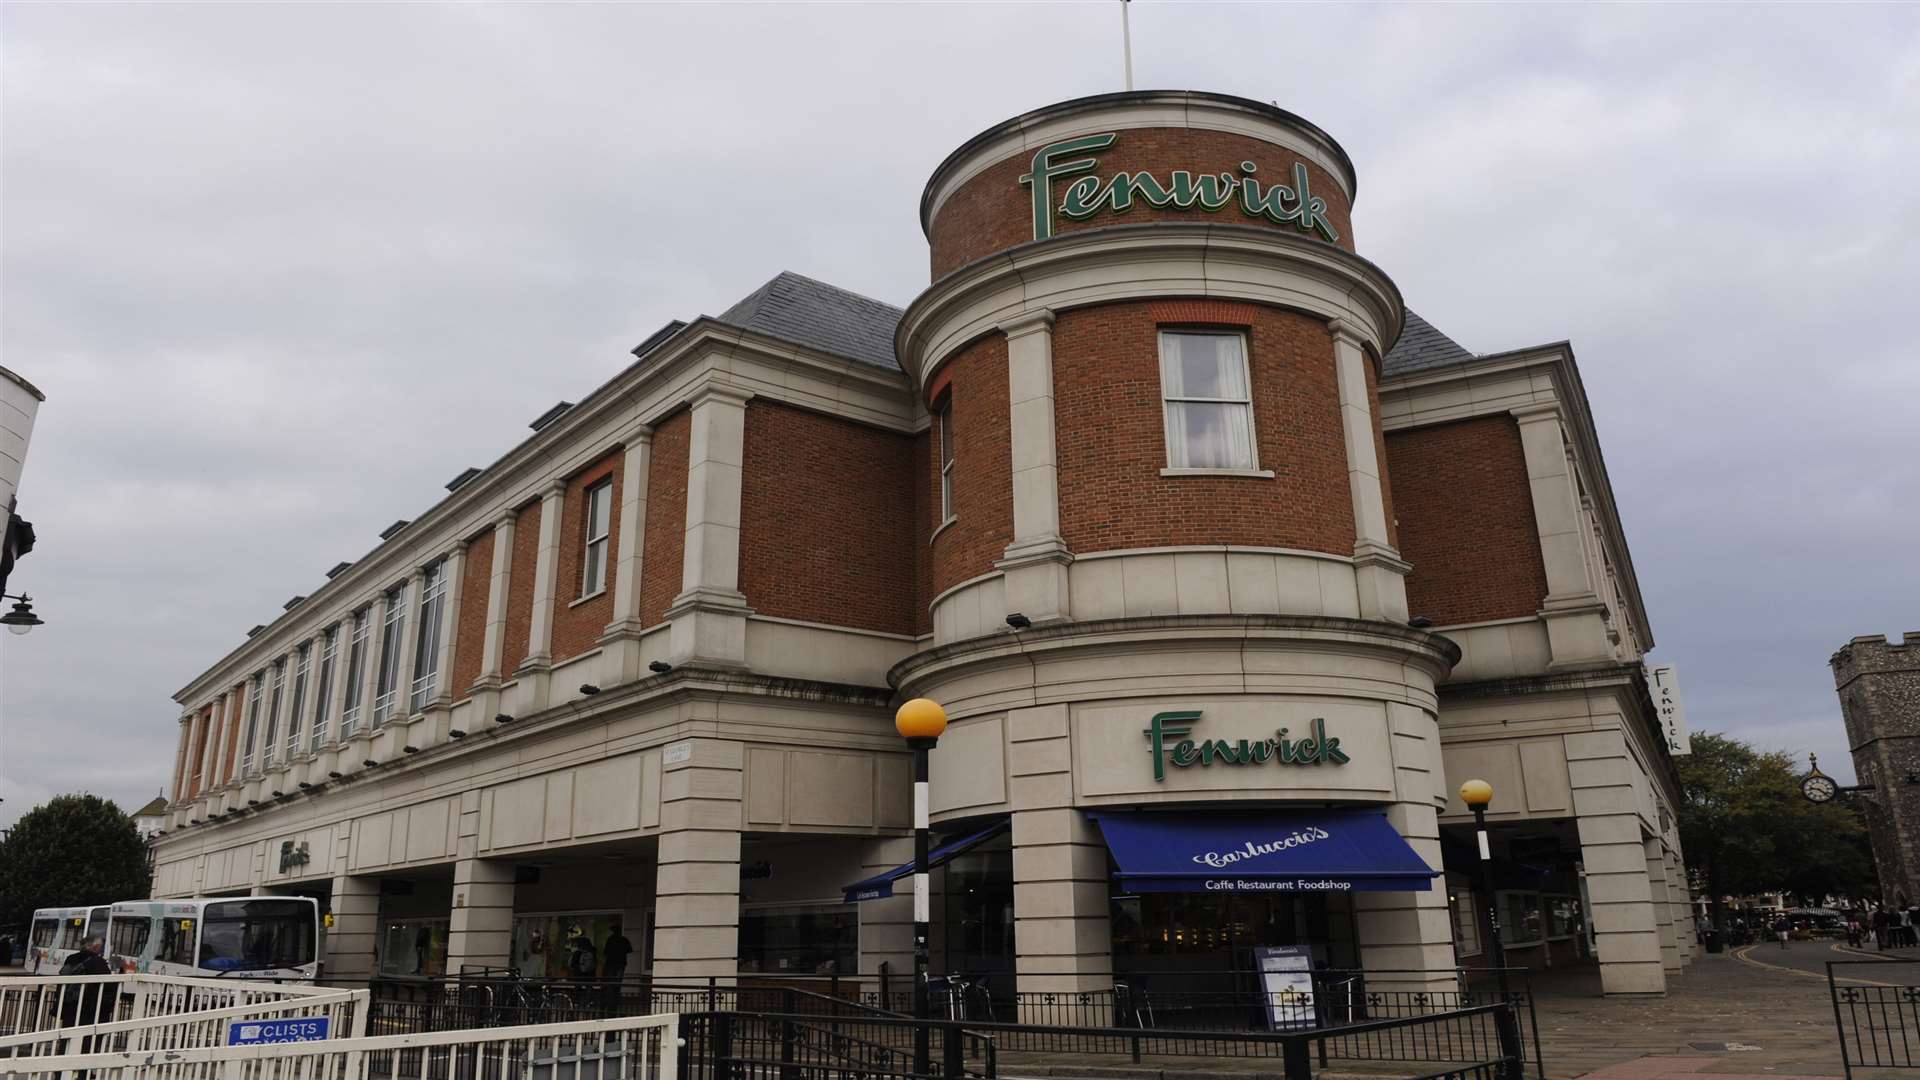 Fenwicks has a team of personal shoppers. Picture: Tony Flashman